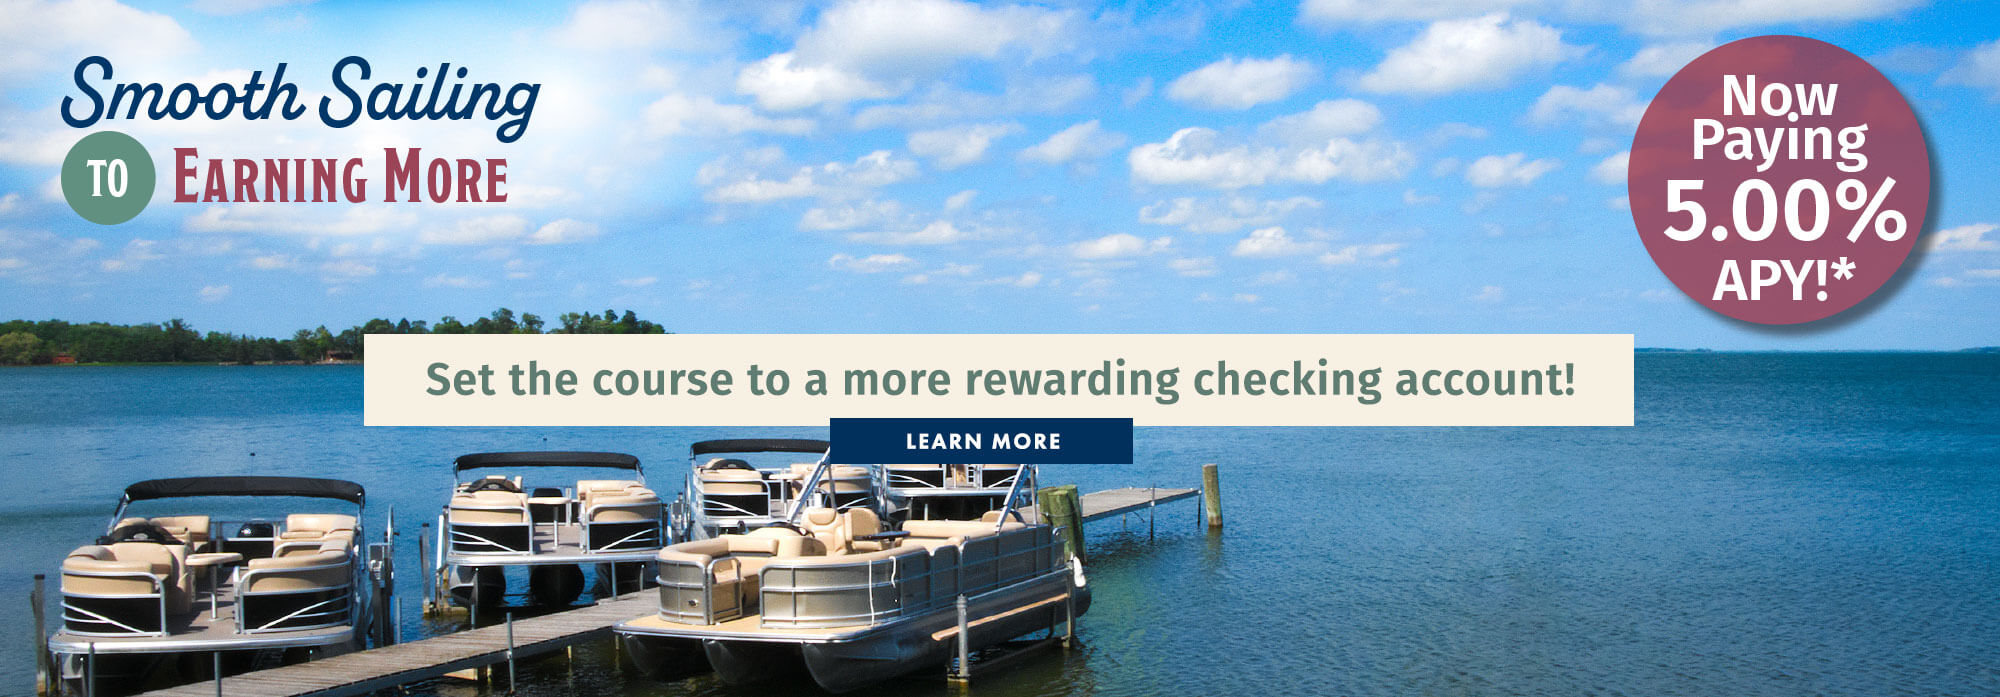 Set the course to a more rewarding checking account!